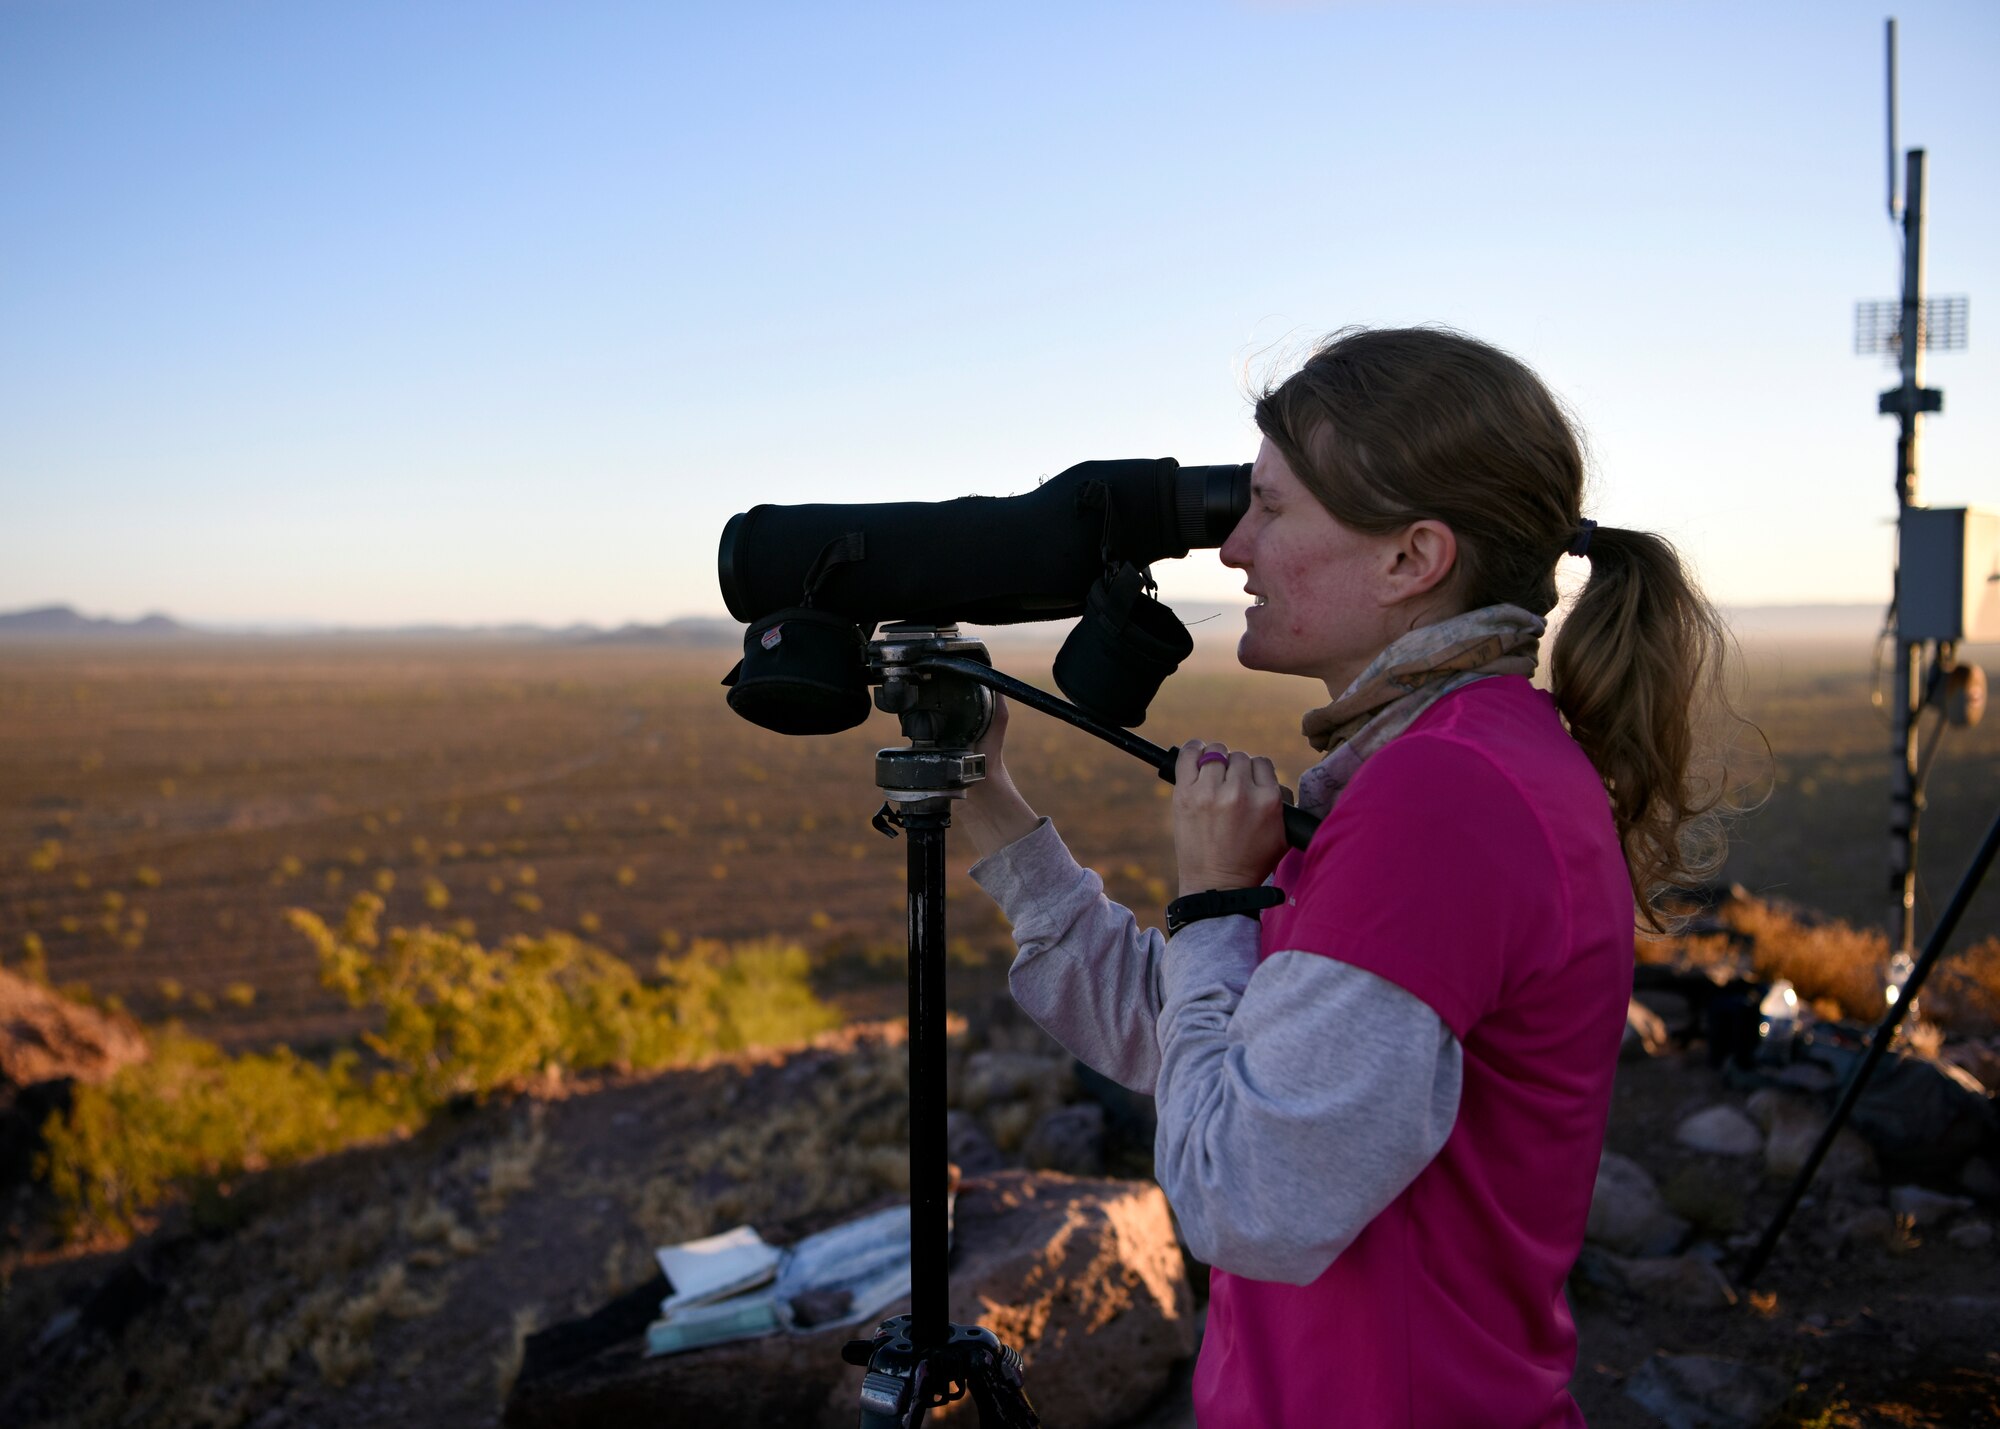 Courtney Kipp, Tunista Services Pronghorn biologist, peers through an observation scope April 17, 2019, at the Barry M. Goldwater Range East in Wellton, Ariz.